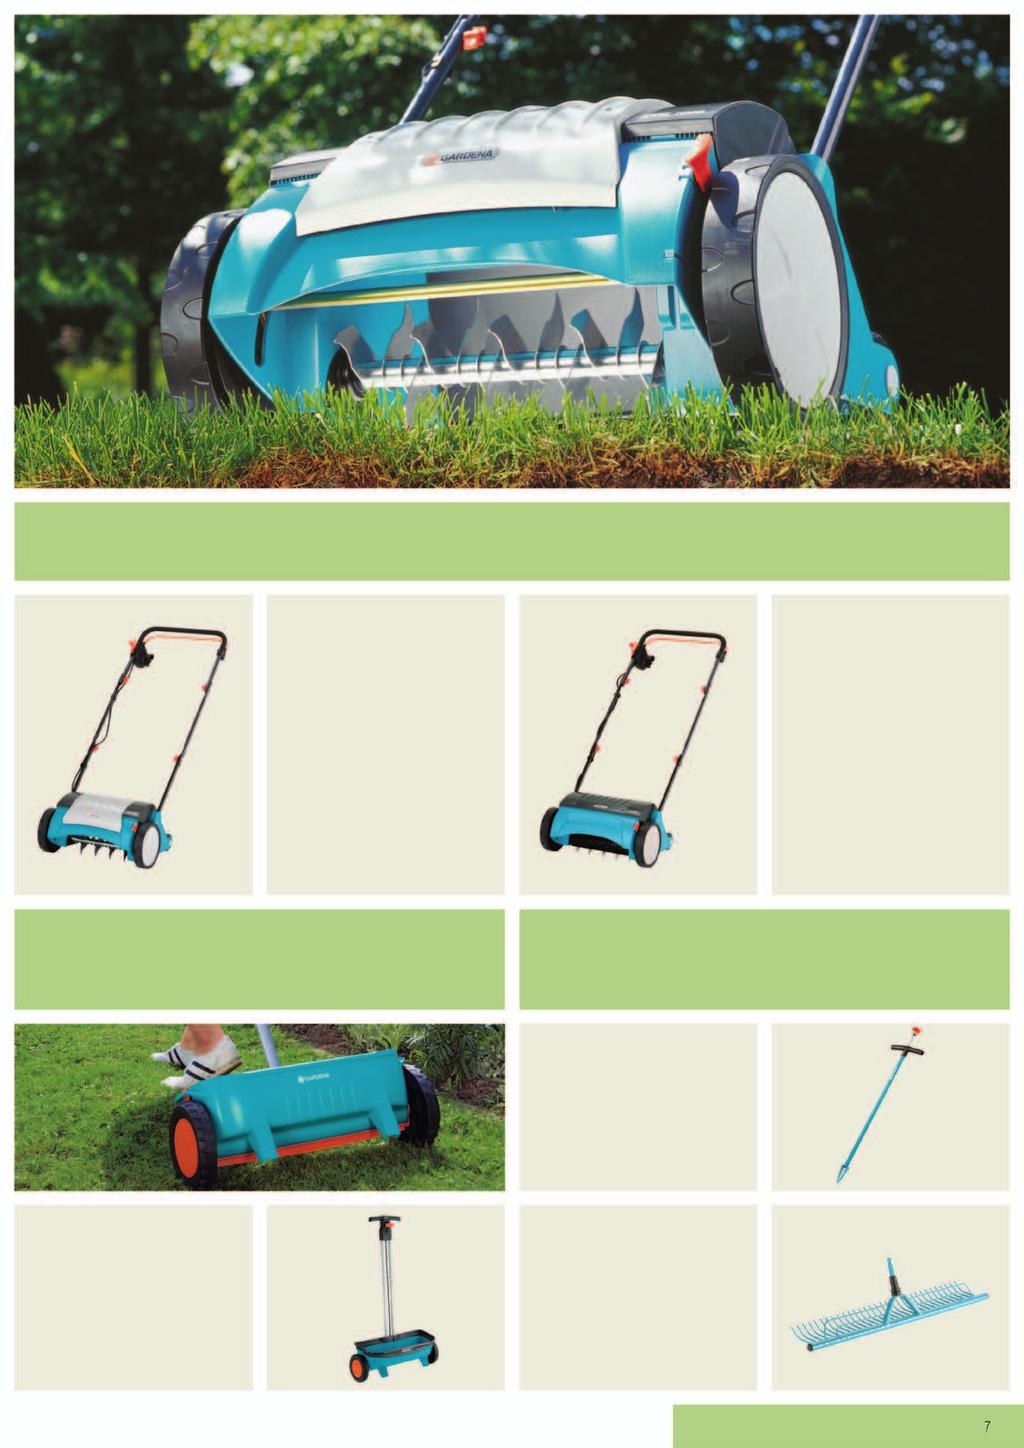 Flexible all-round trimmer for longer edges and hard-to-reach spots. Cable-free trimming of lawn edges thanks to the powerful lithium-ion battery.